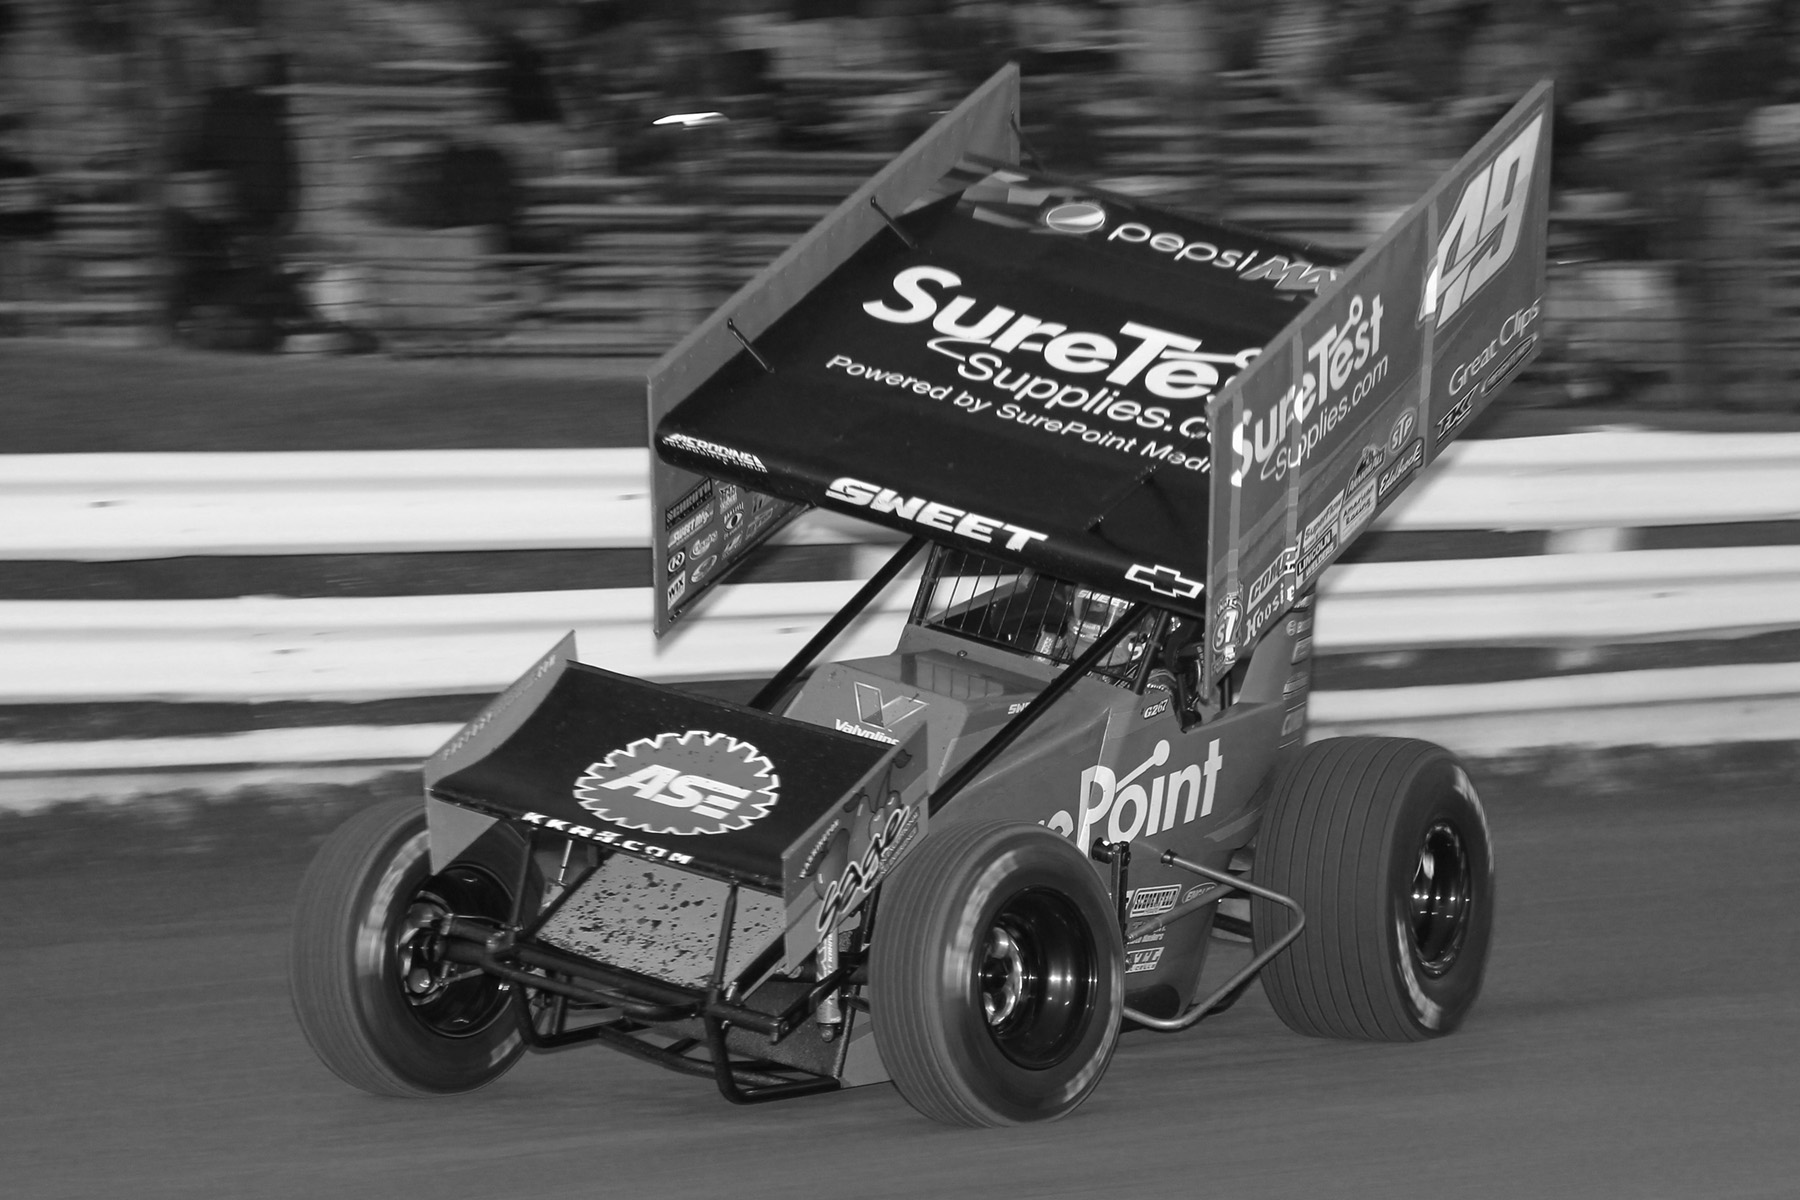 Commercial Photographer- York, PA - TD Photographic Imaging Williams Grove Speedway Brad Sweet